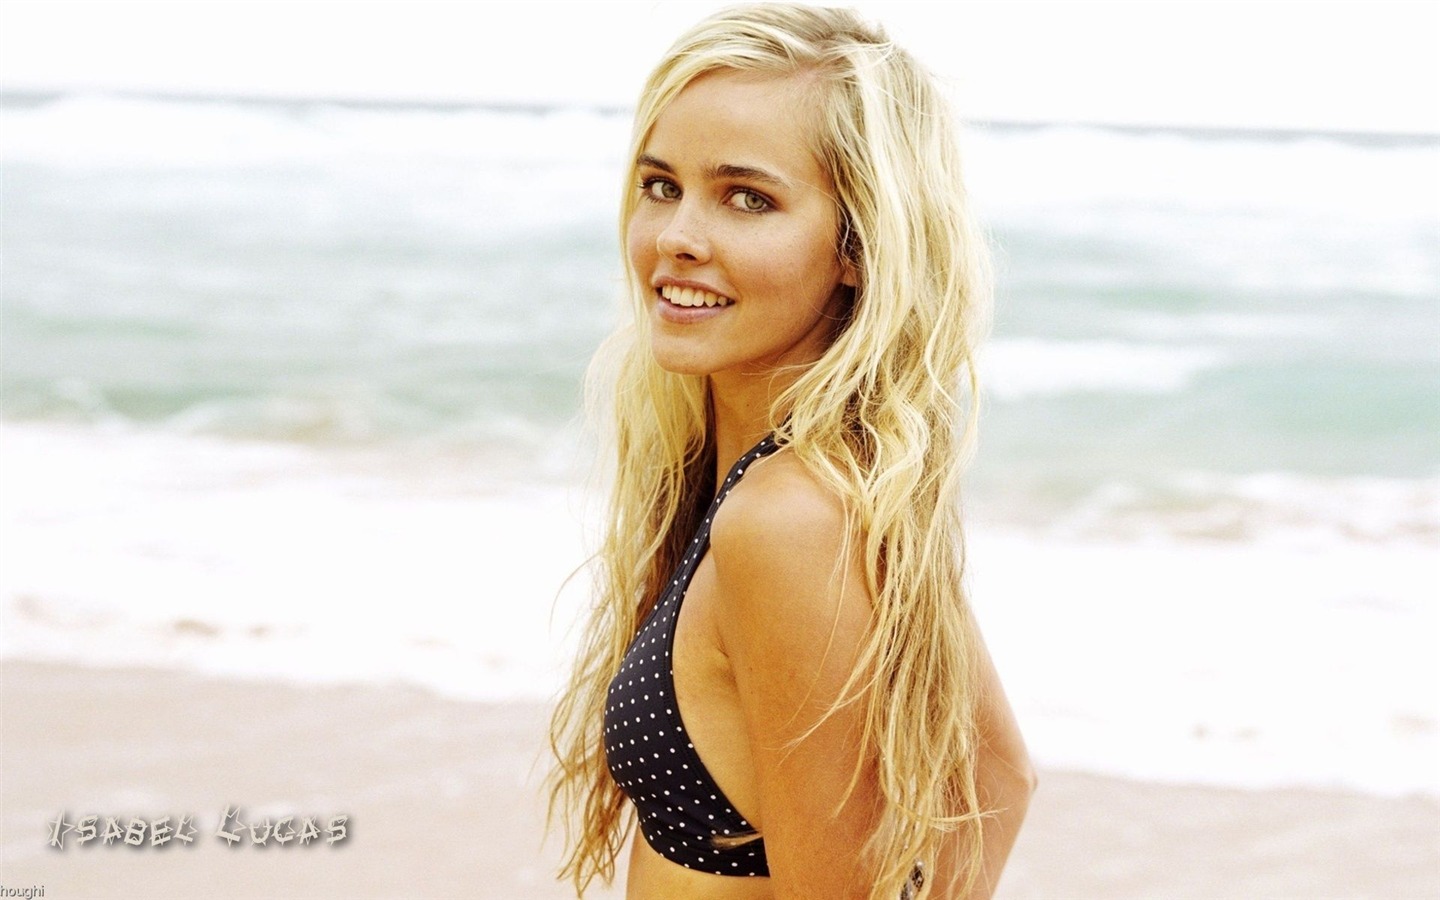 Isabel Lucas #005 - 1440x900 Wallpapers Pictures Photos Images